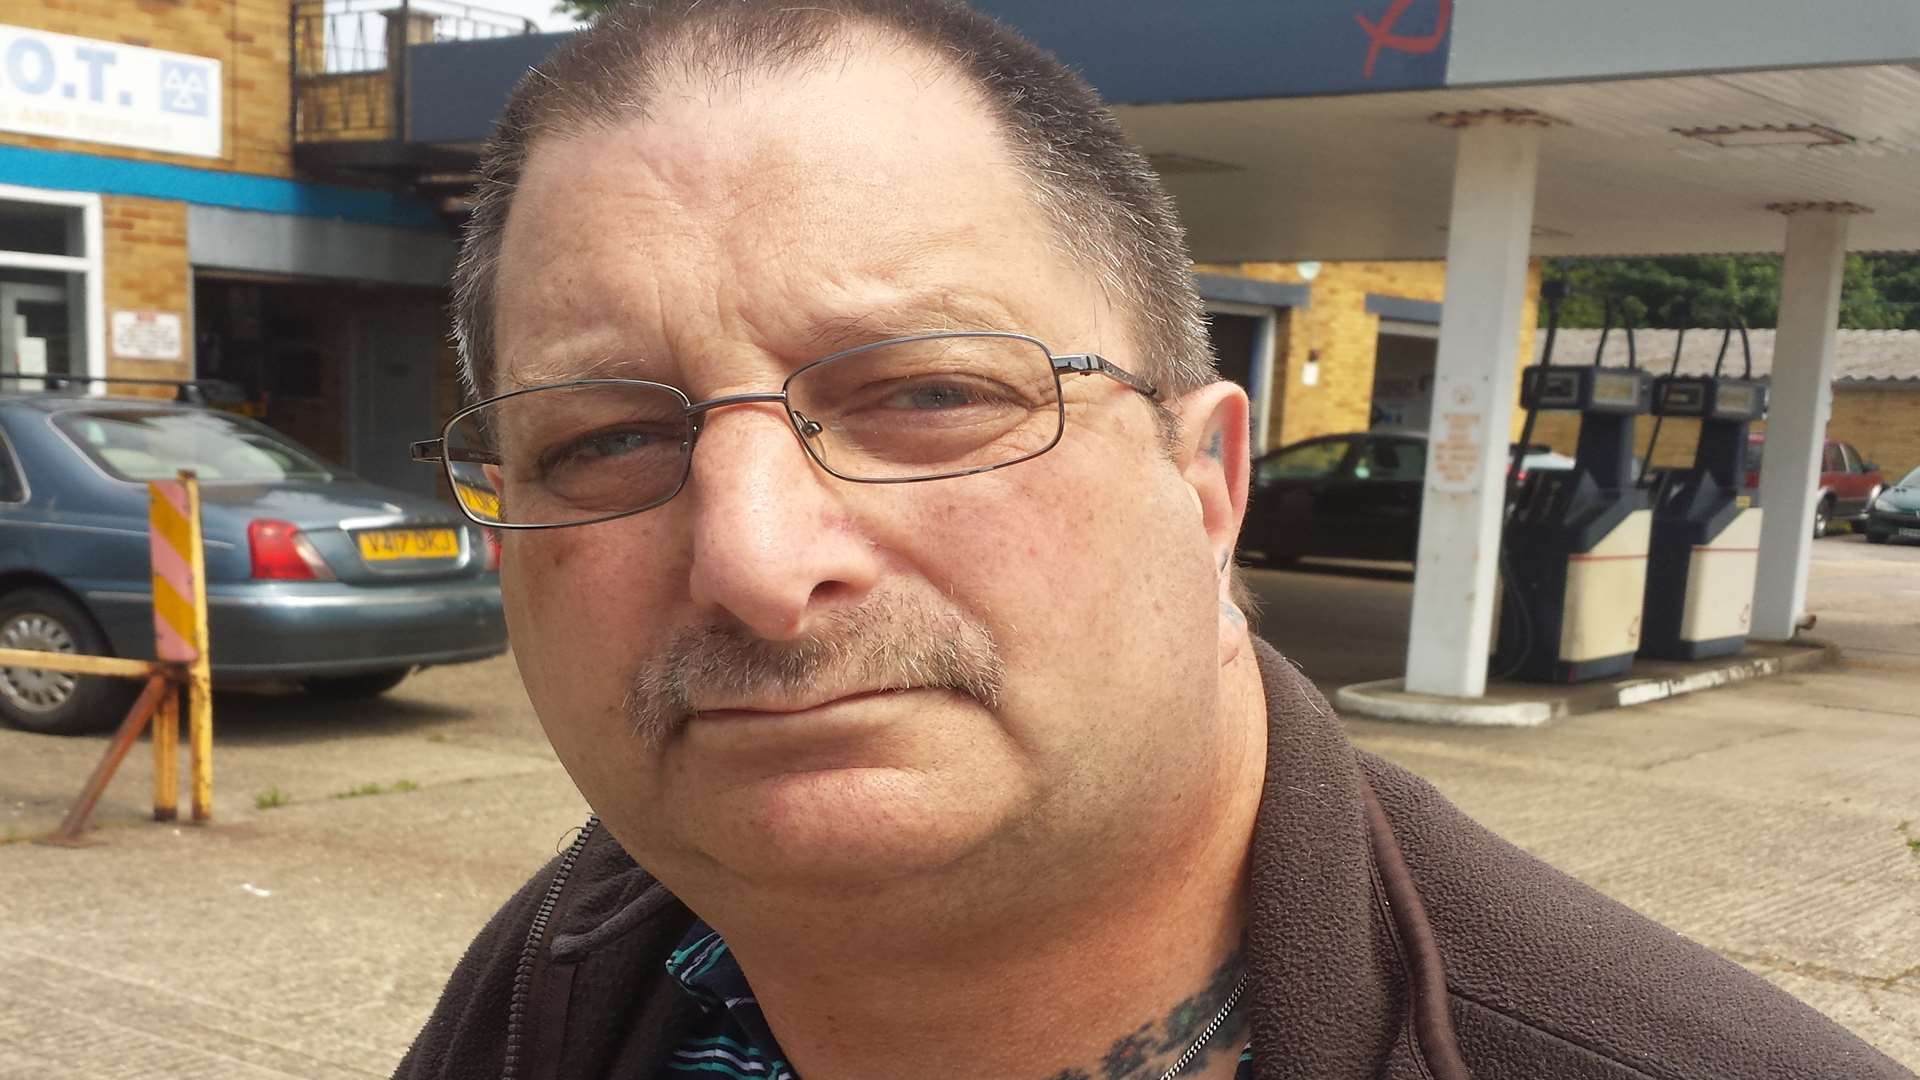 Alan Glicksman was on his way to Waterloo East with his wife